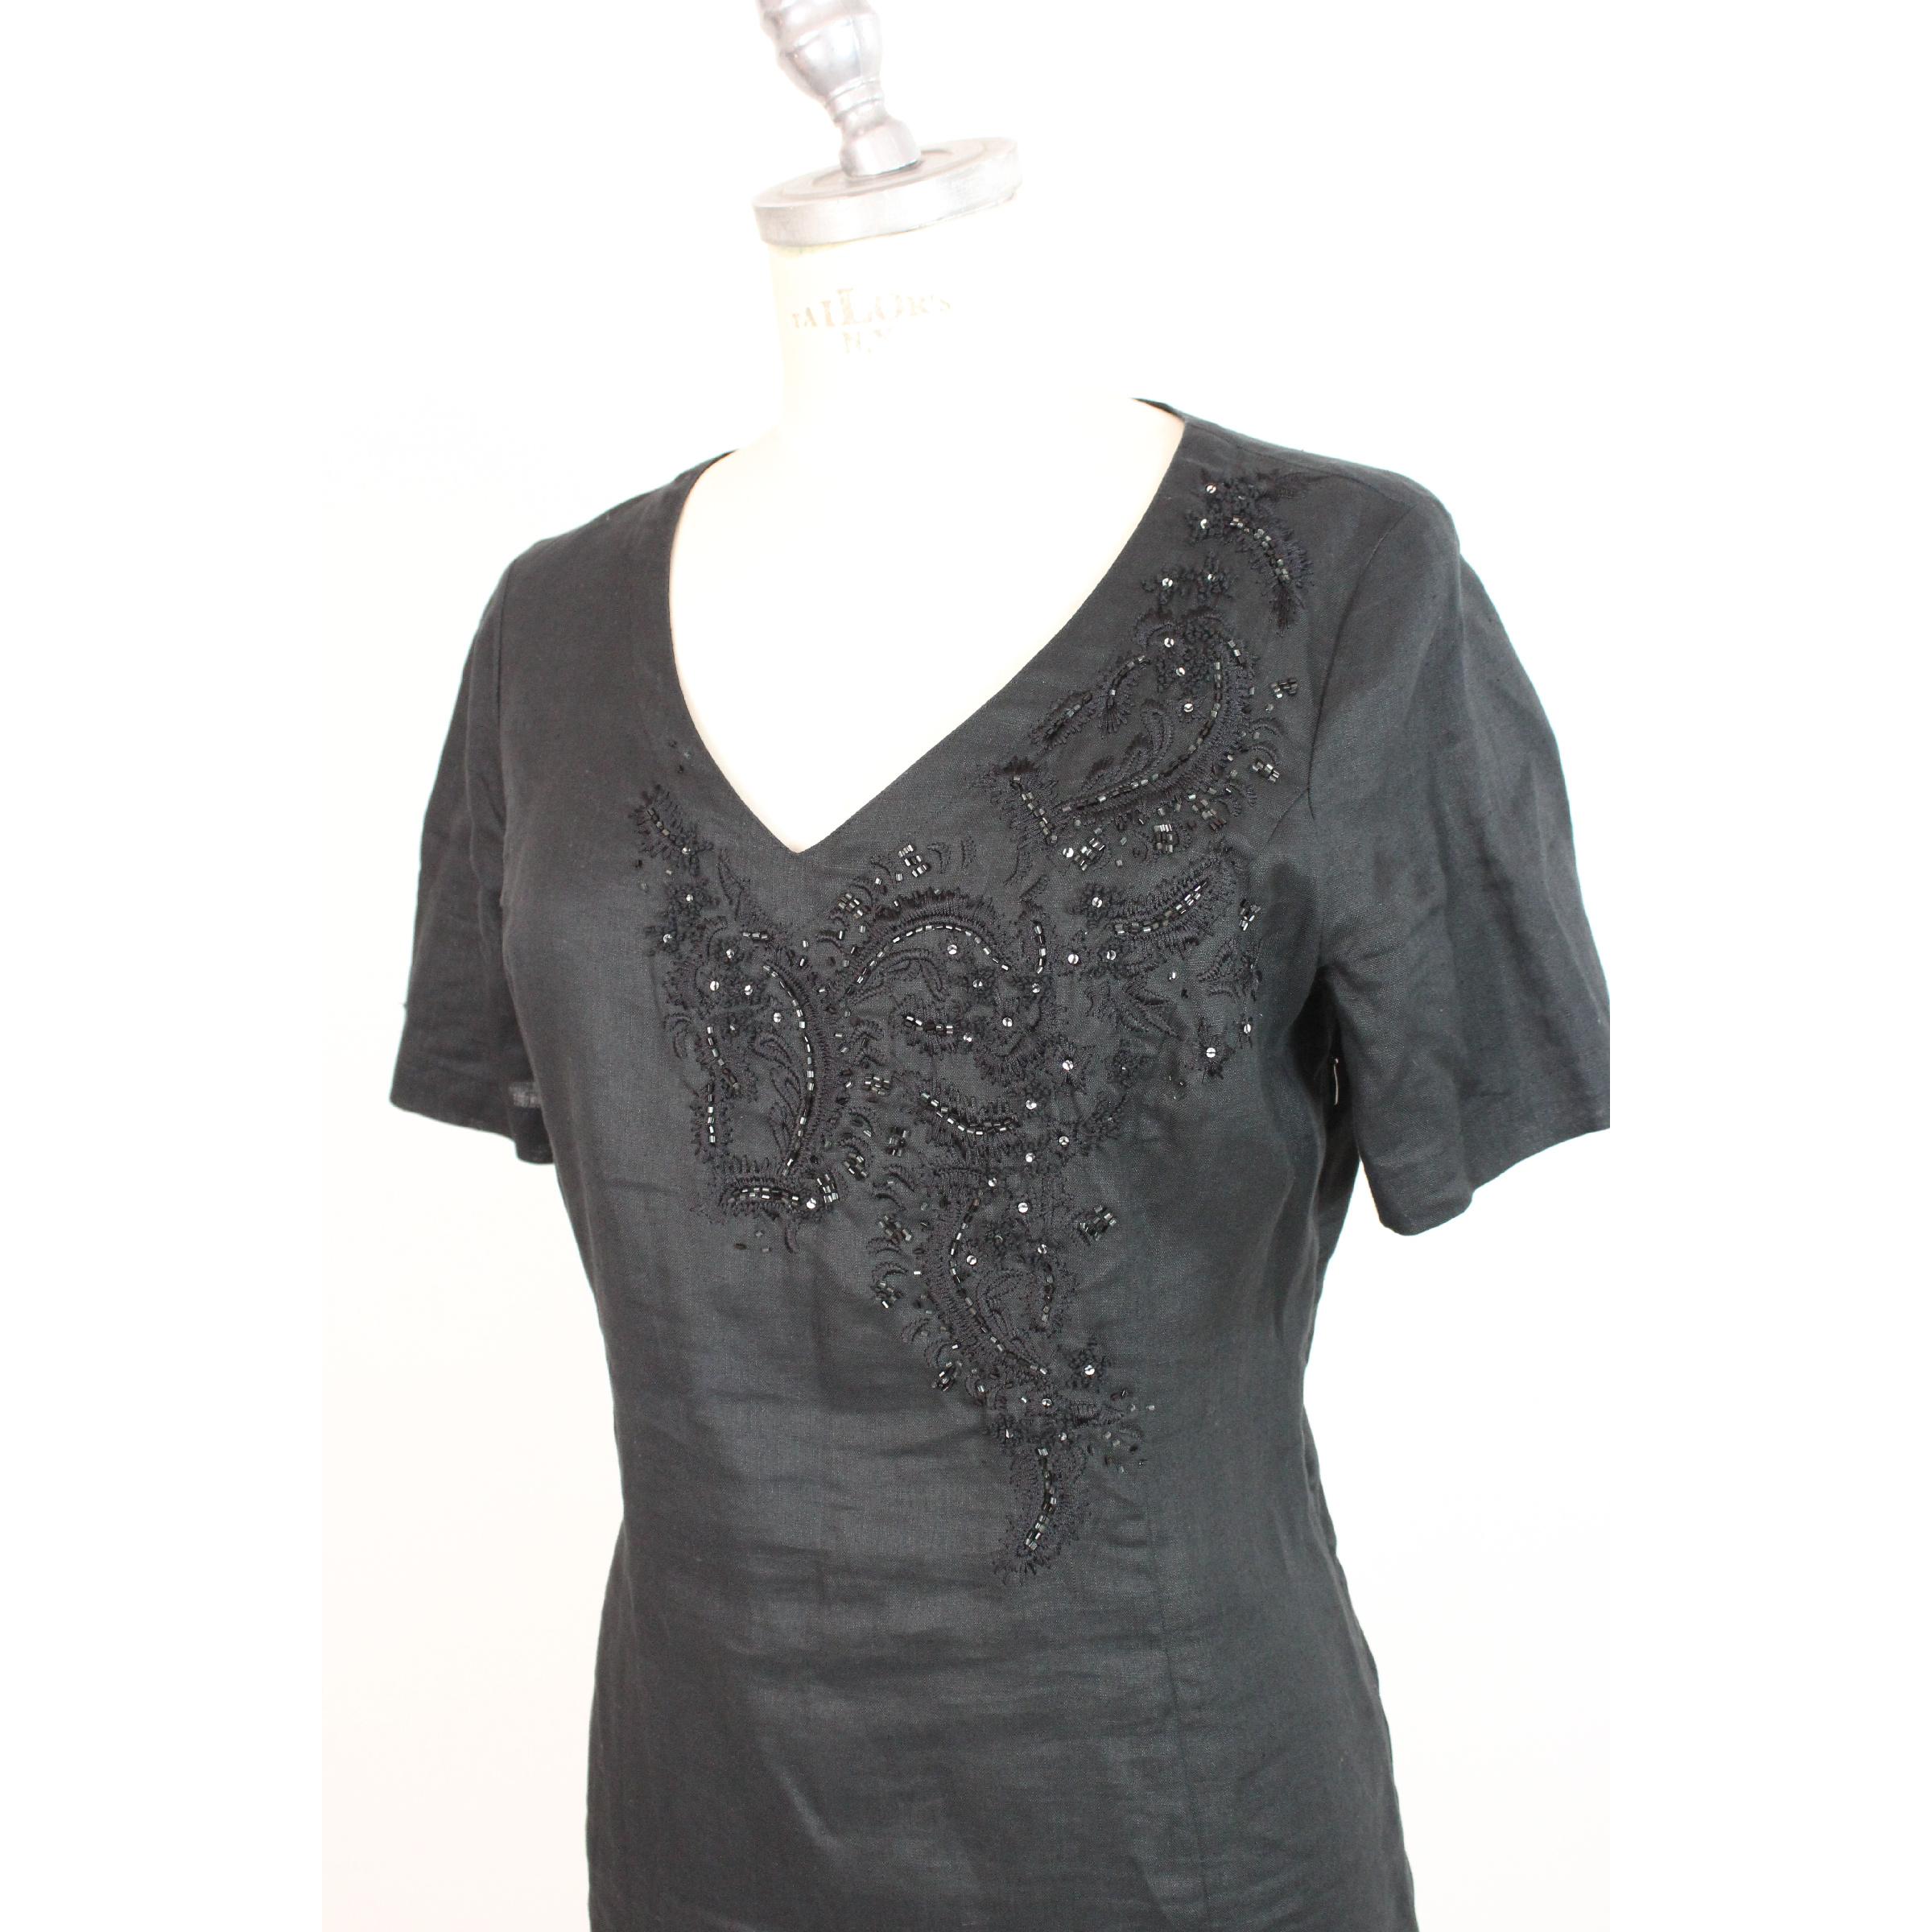 Krizia long dress for women vintage, black with rhinestones on the chest, 100% linen. With short sleeves. Made in Italy. Excellent vintage conditions.

Size: 44 It 10 Us 12 Uk

Shoulder: 44 cm
Bust / Chest: 53 cm
Sleeve: 23 cm
Length: 105 cm